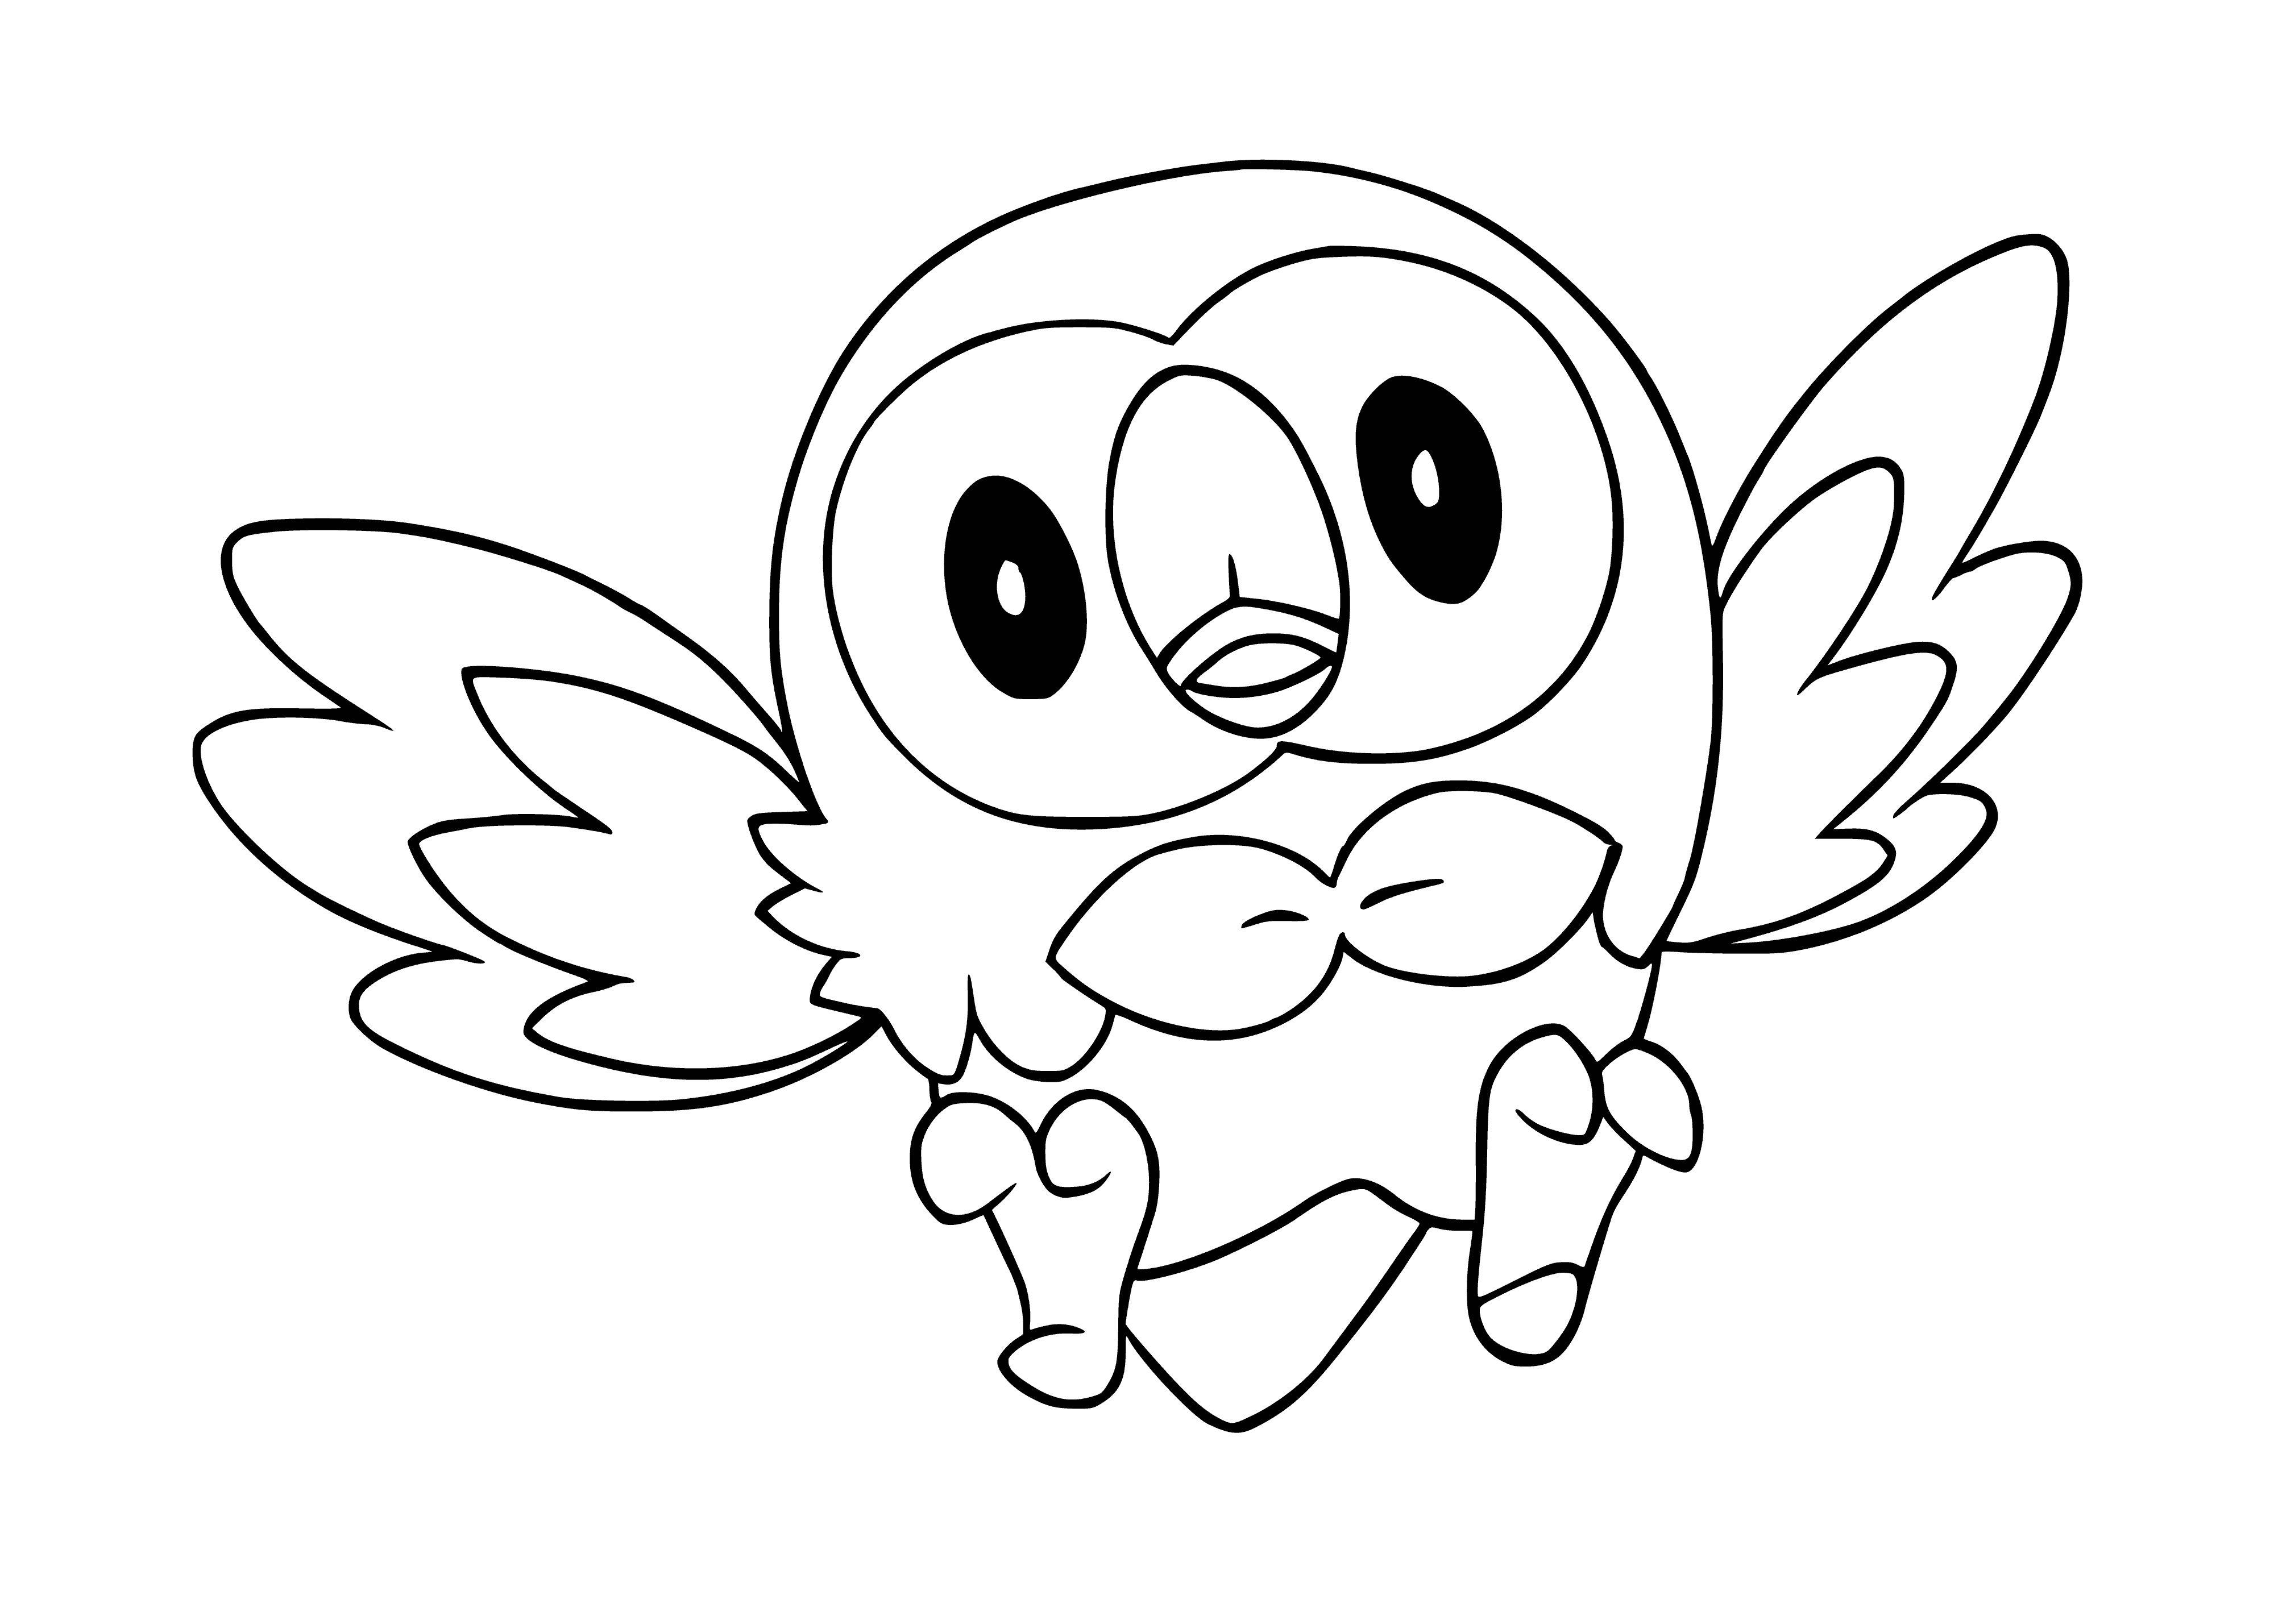 coloring page: Evan's Pokemon has a blue textured body, white spots, bulbous nose, big sad eyes, two stubby legs and a long tail - looks like it's evolving.